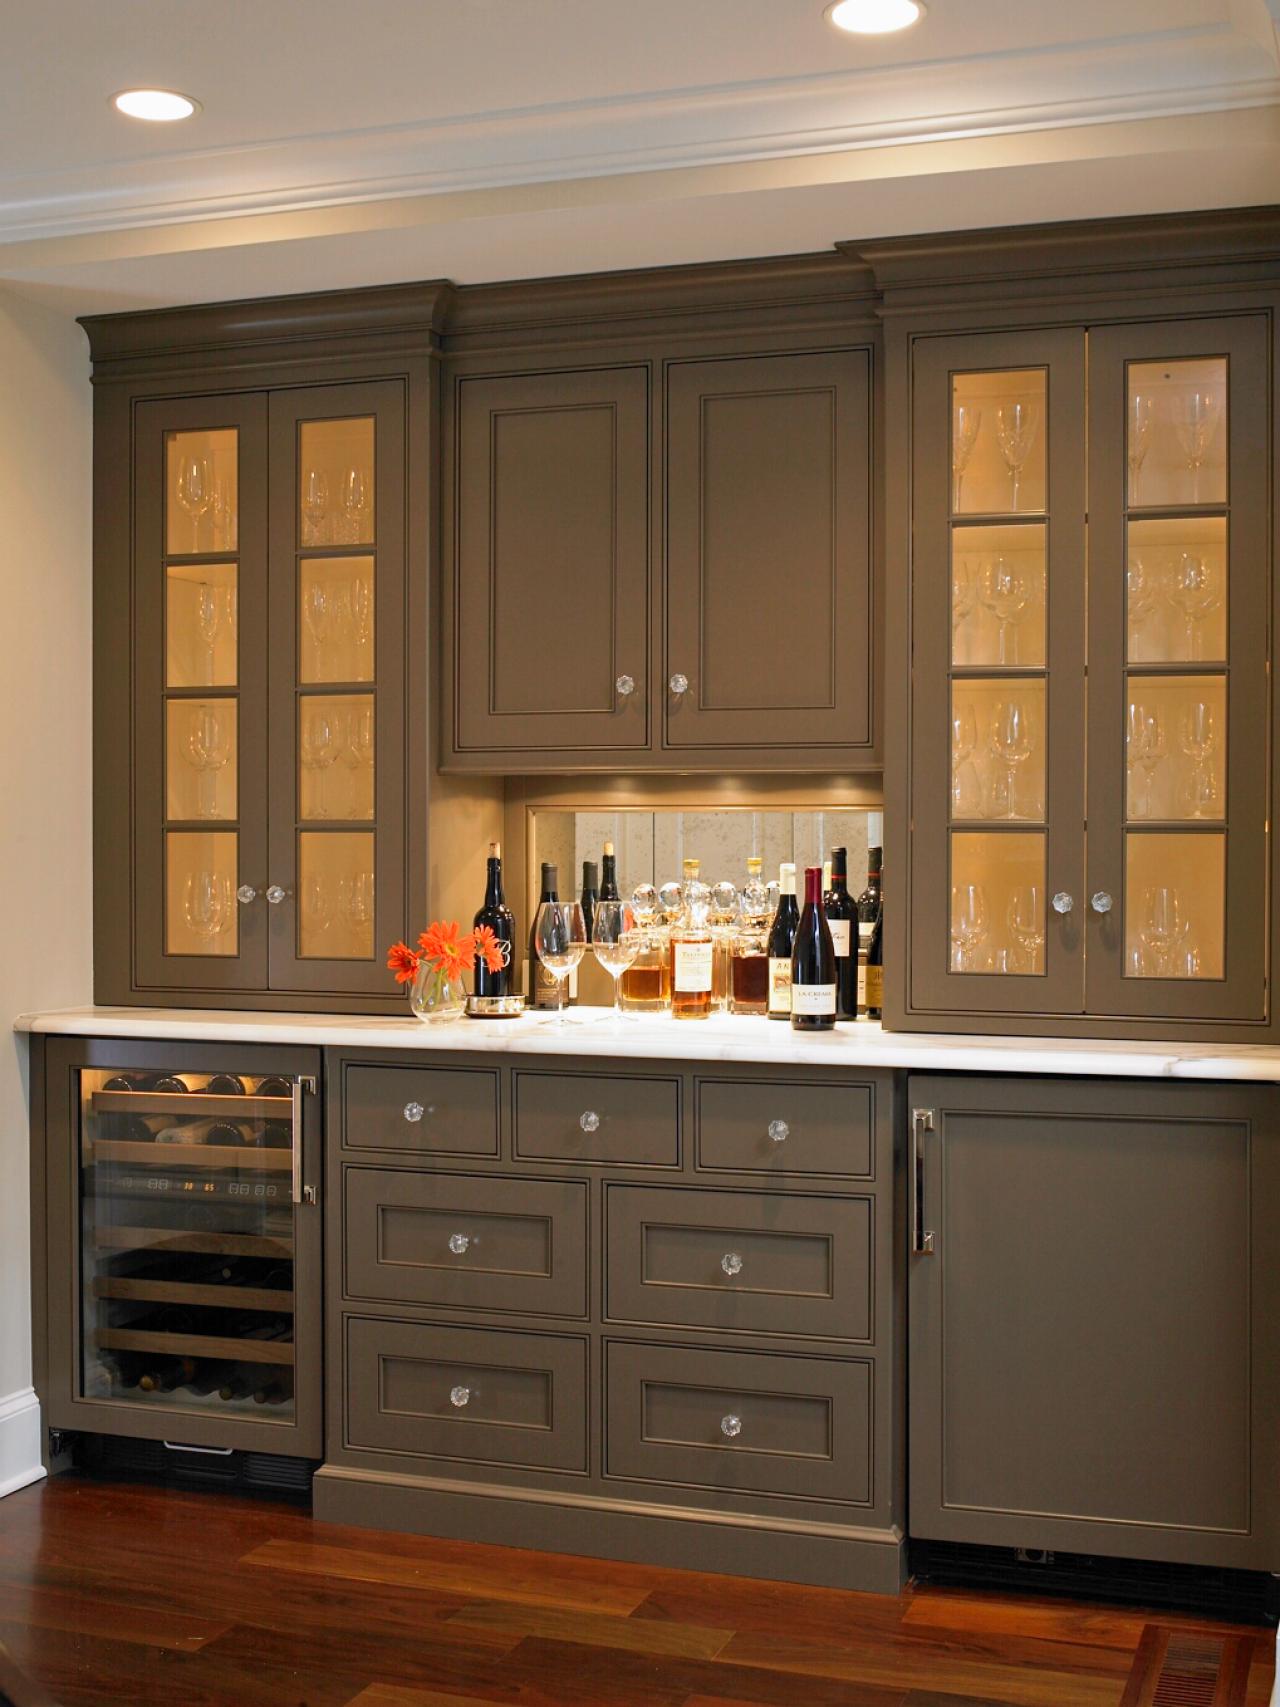 kitchen cabinet colors and ideas photo - 6